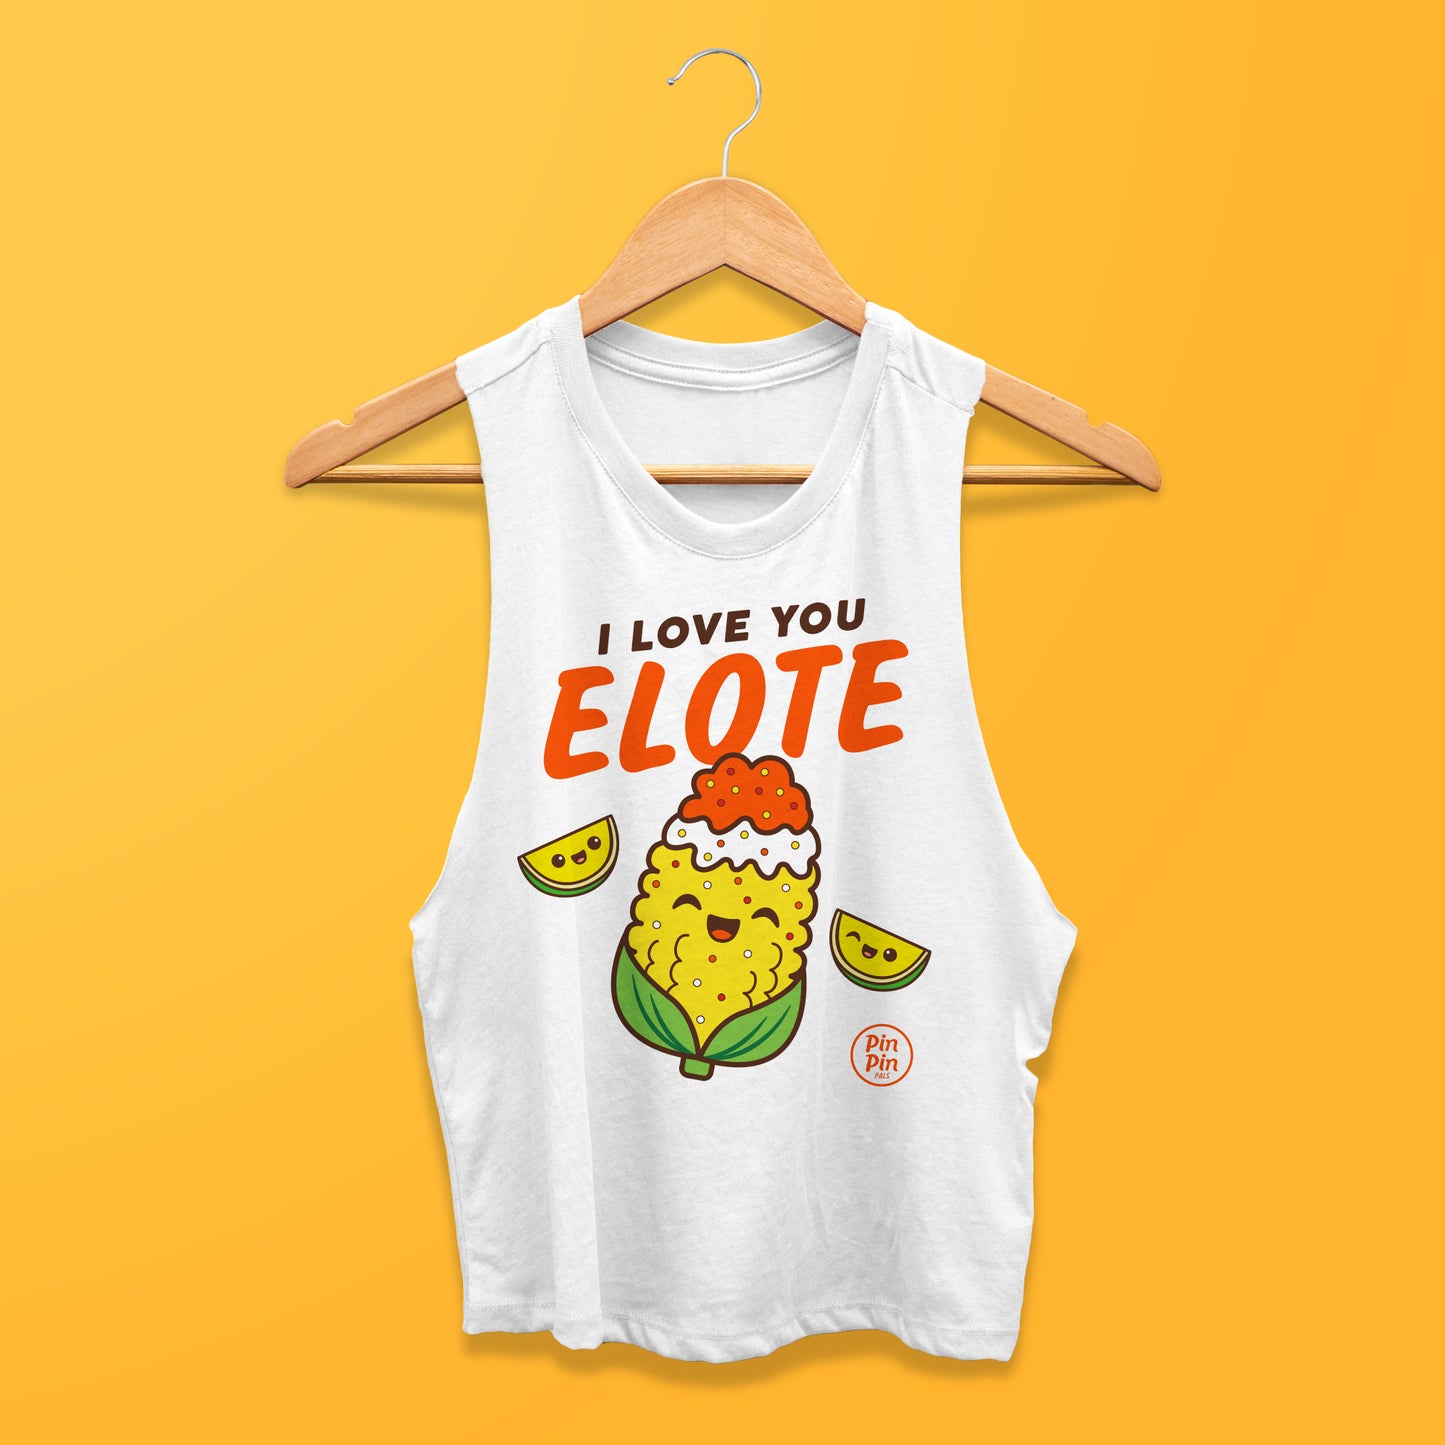 I Love You Elote - Women's Cropped Tank Top